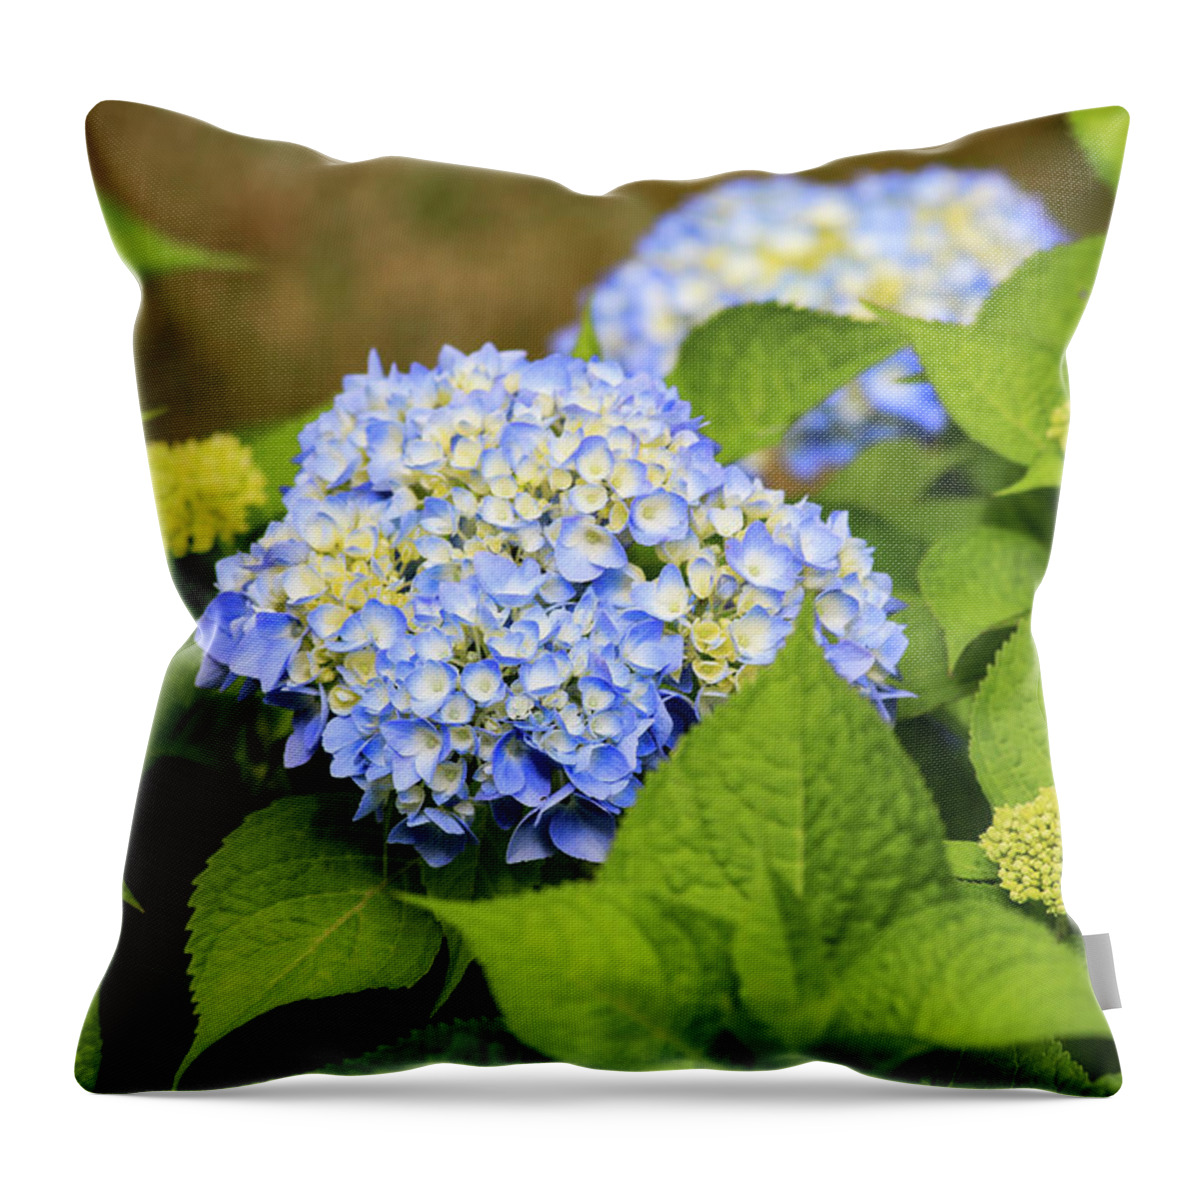 Rhode Island Throw Pillow featuring the photograph Blue Hydrangea by Tanya Owens